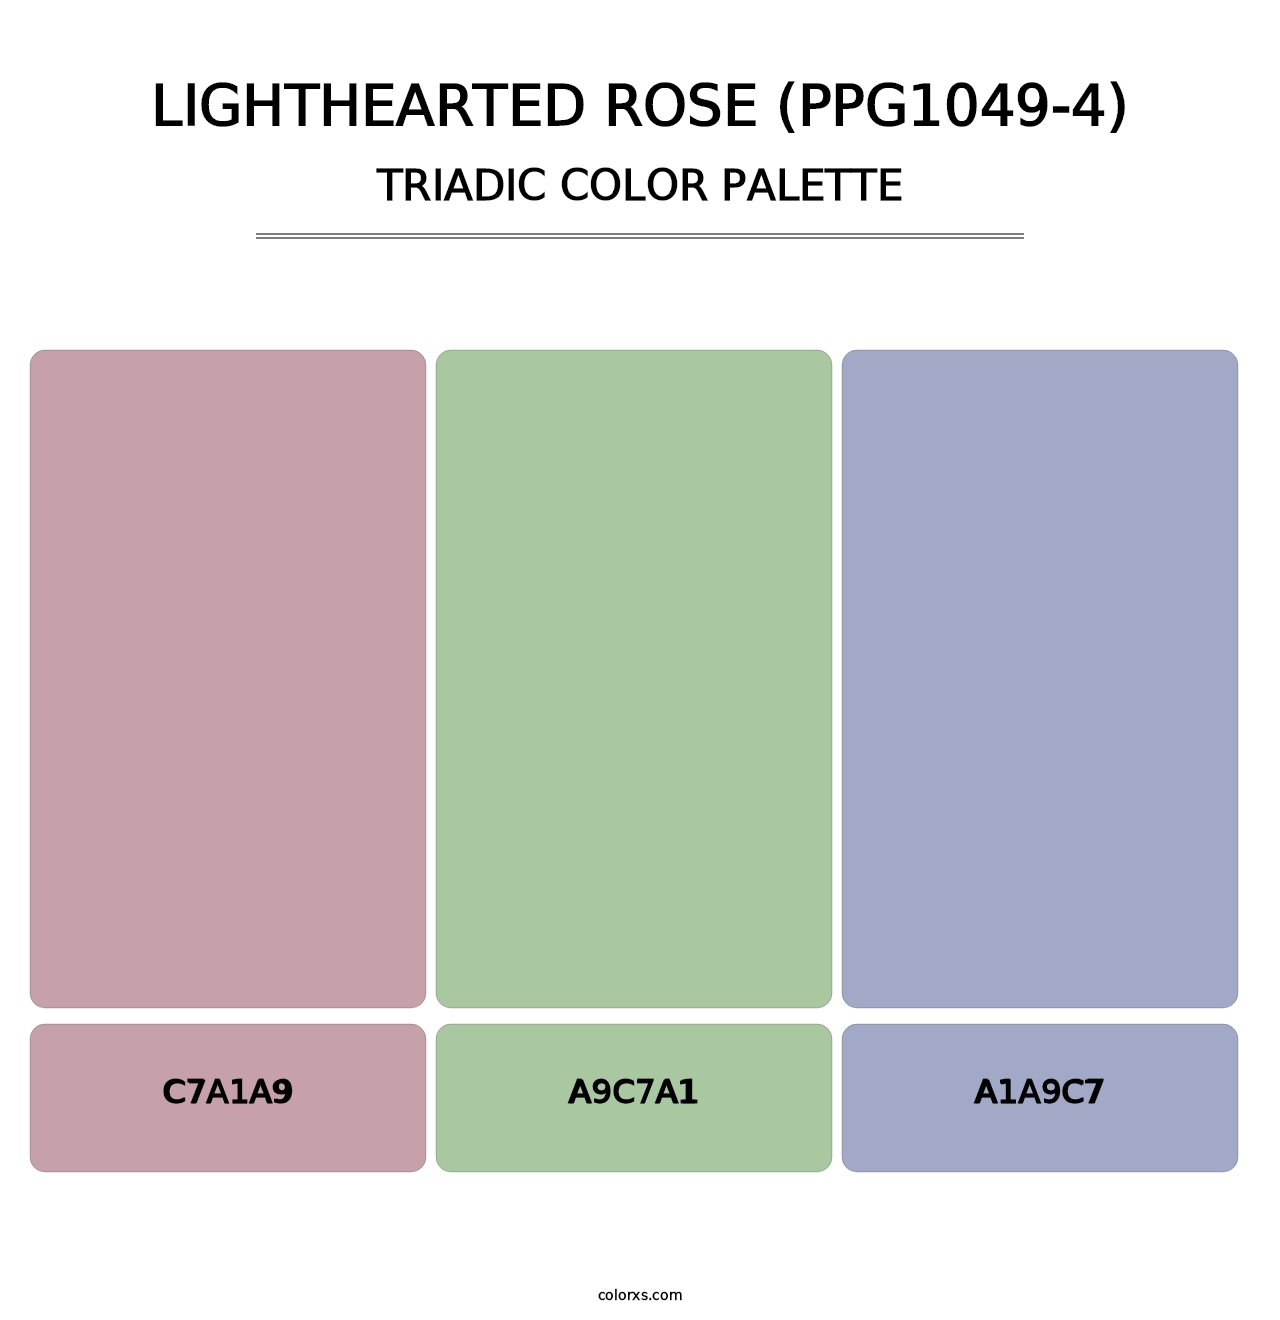 Lighthearted Rose (PPG1049-4) - Triadic Color Palette